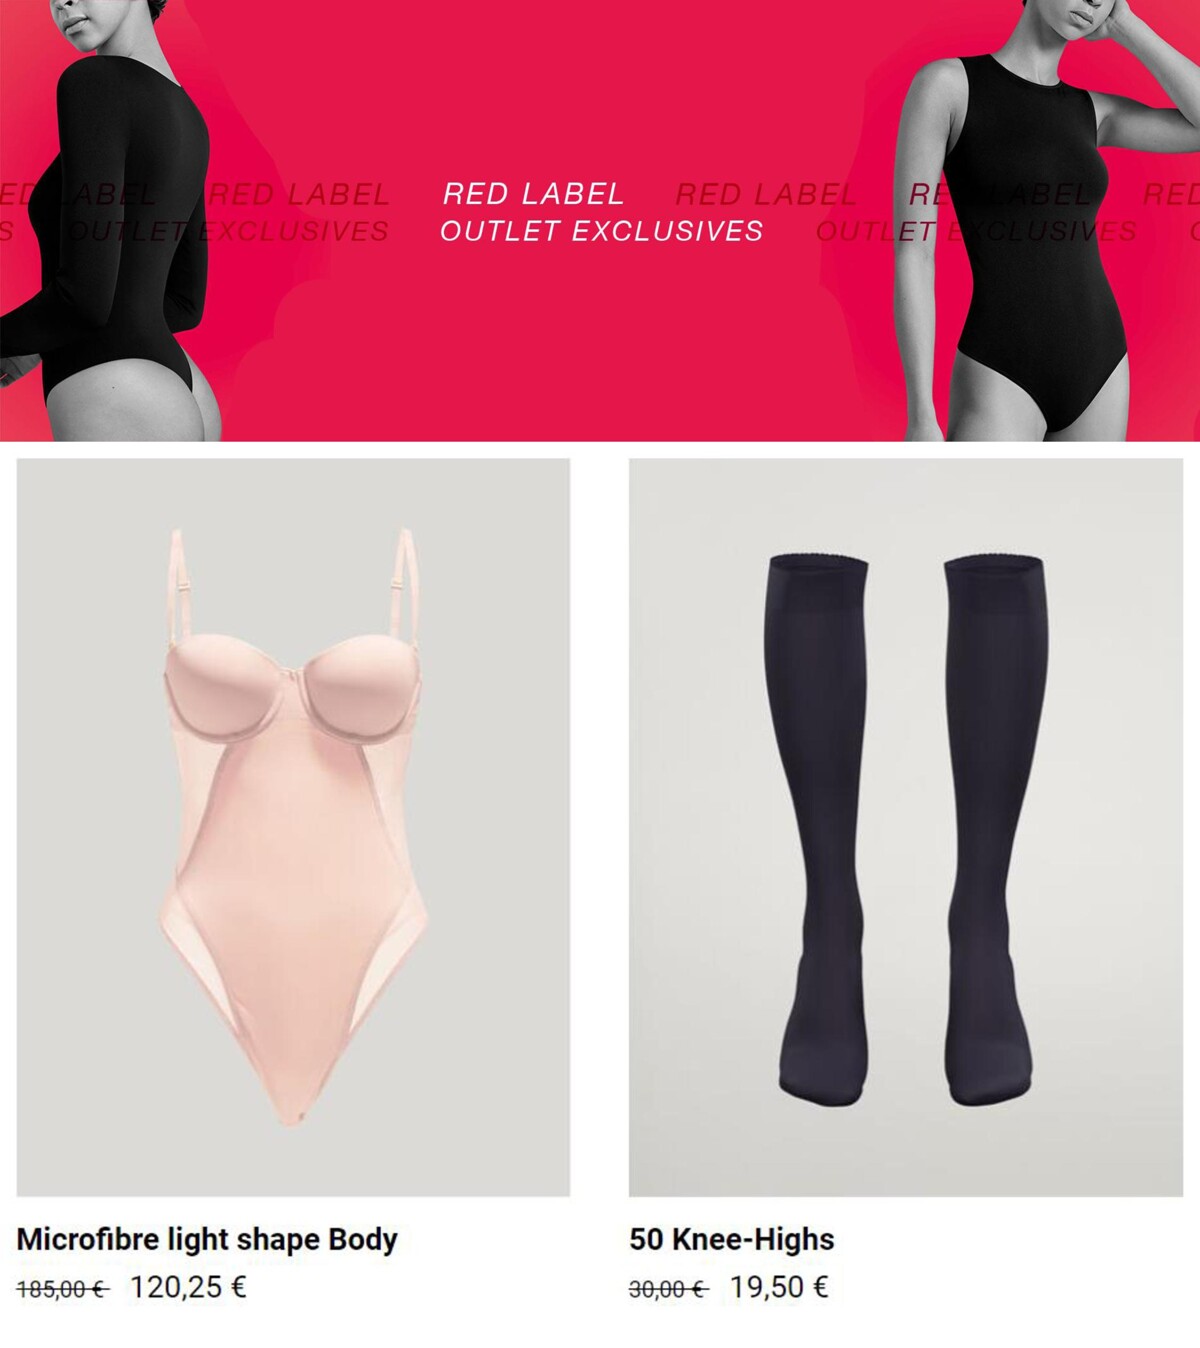 Catalogue Wolford Red Label 40% Off, page 00009